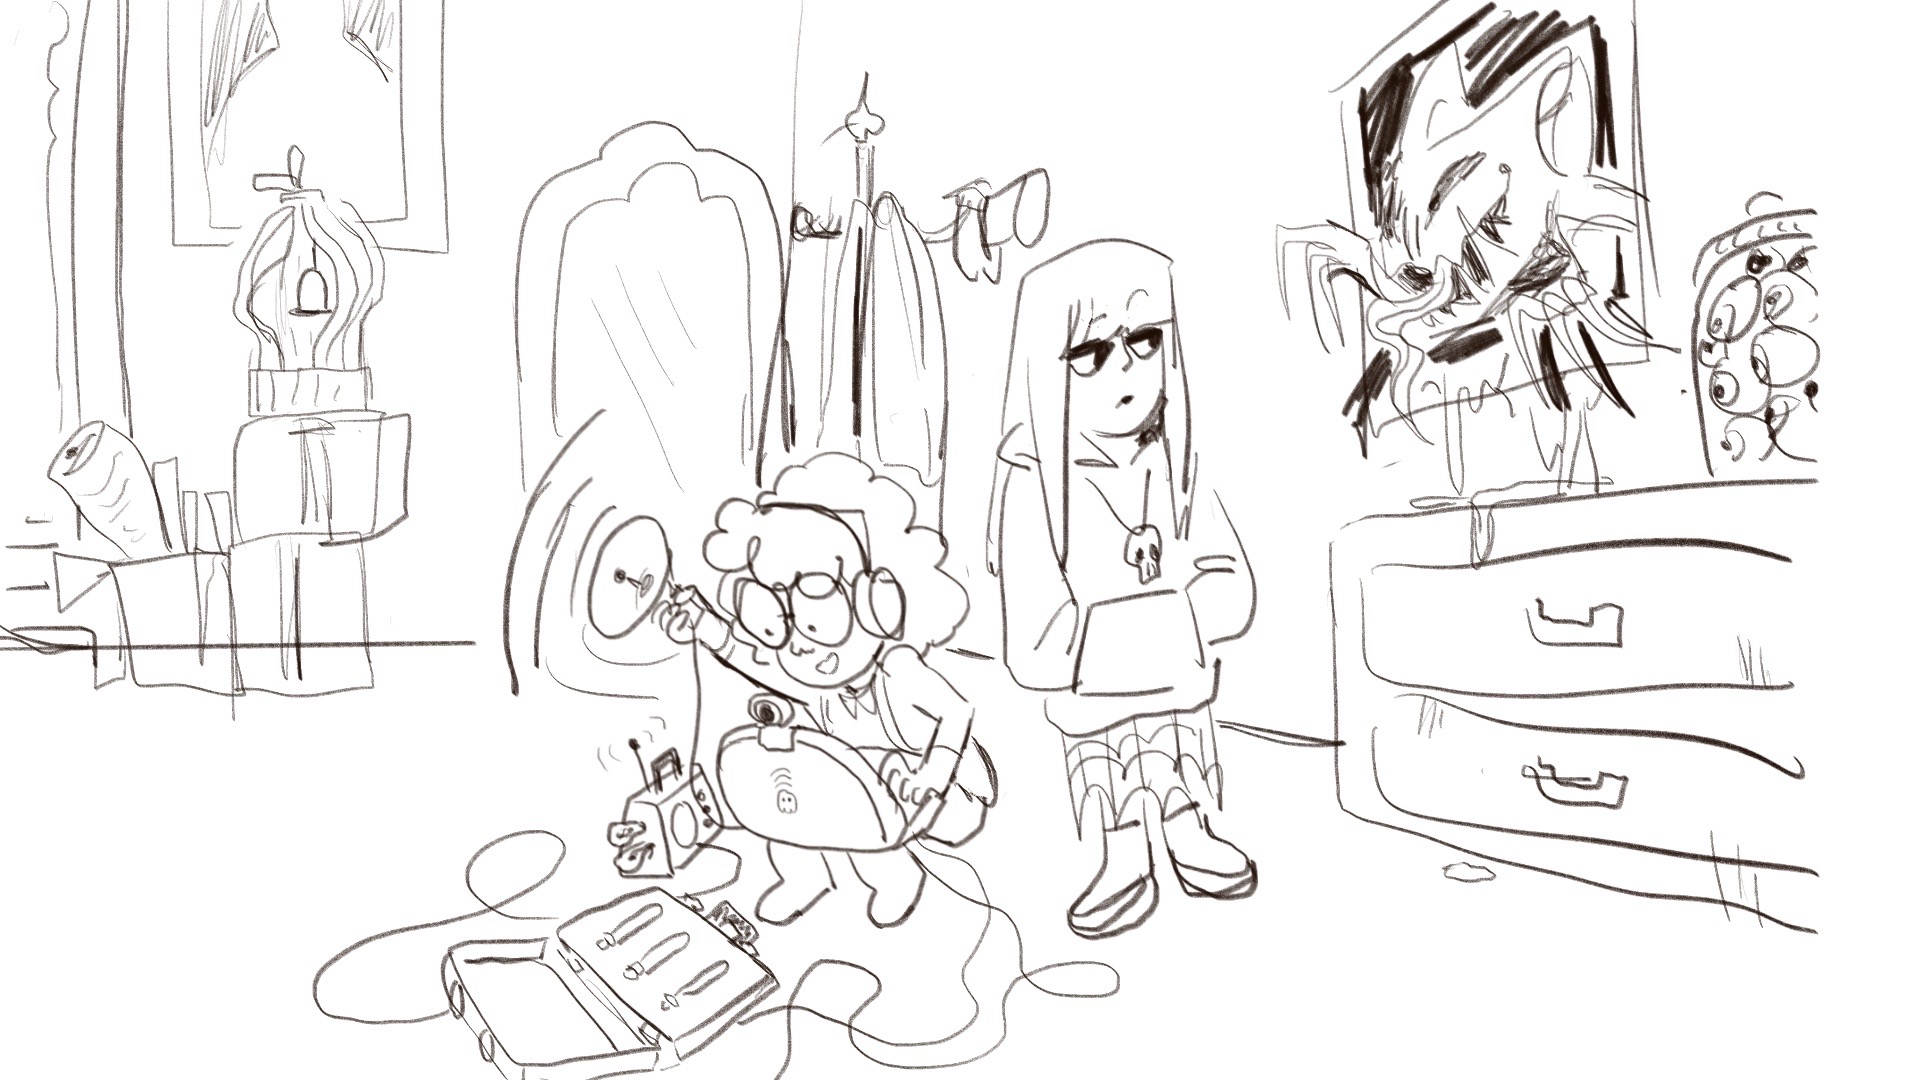 Amiria and Ena sitting in a dusty attic filled with furniture. Amiria is excited on her laptop looking for evidence of ghosts while Ena notices a bat-like ghost crawl out of a painting on the wall.